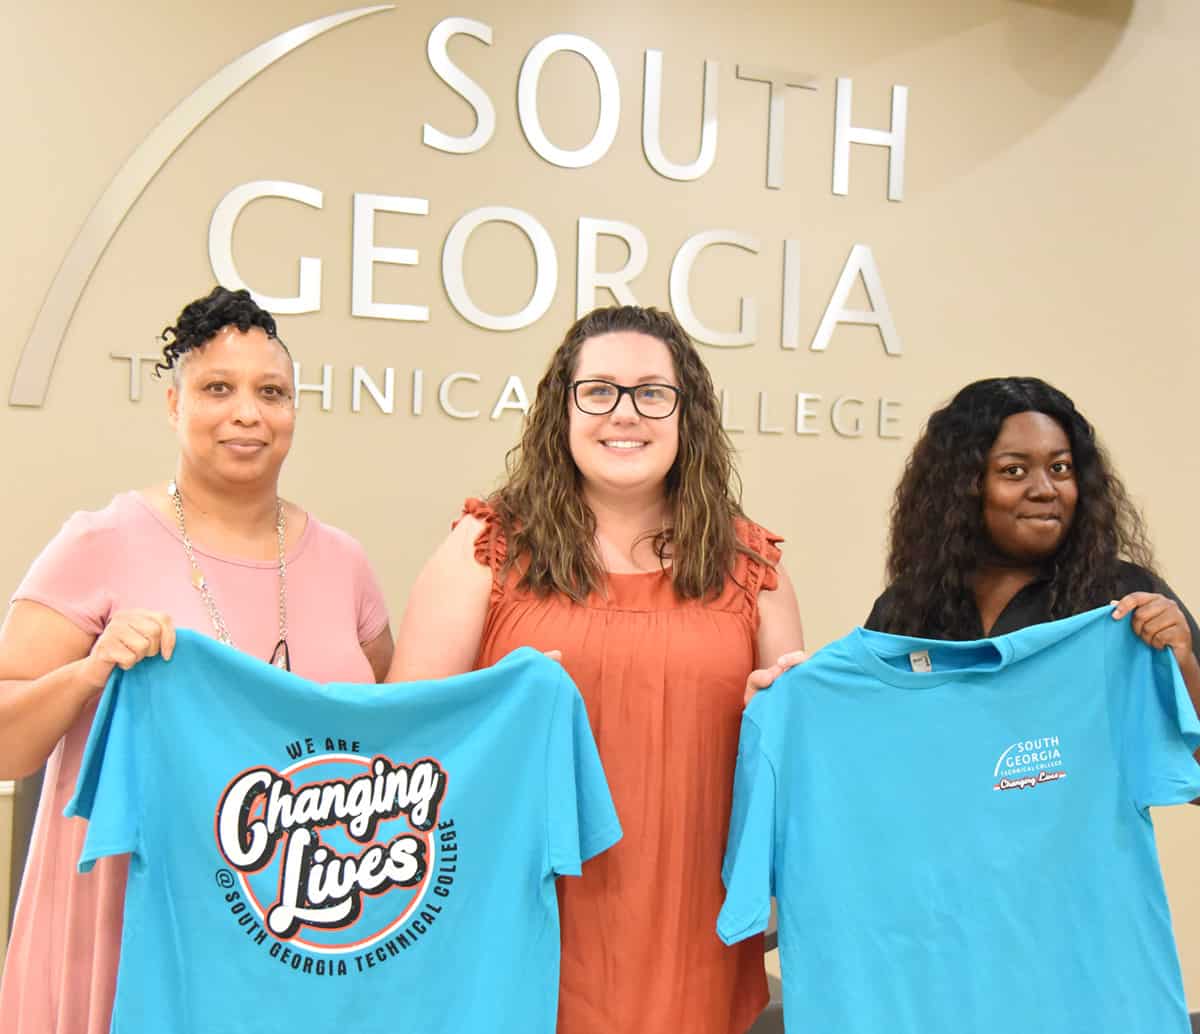 Free “Changing Lives” t-shirts will be available to students registering for Fall Semester at South Georgia Technical College while supplies last. In-person registration will be held July 20th, 2021 in Americus and Crisp County. Shown above (l to r) are SGTC admissions staff Shonda Bodie, SGTC High School Initiatives Specialist Beth Wisham, and SGTC Admissions staff Brittany Rogers showing off the new SGTC “Changing Lives” t-shirts.